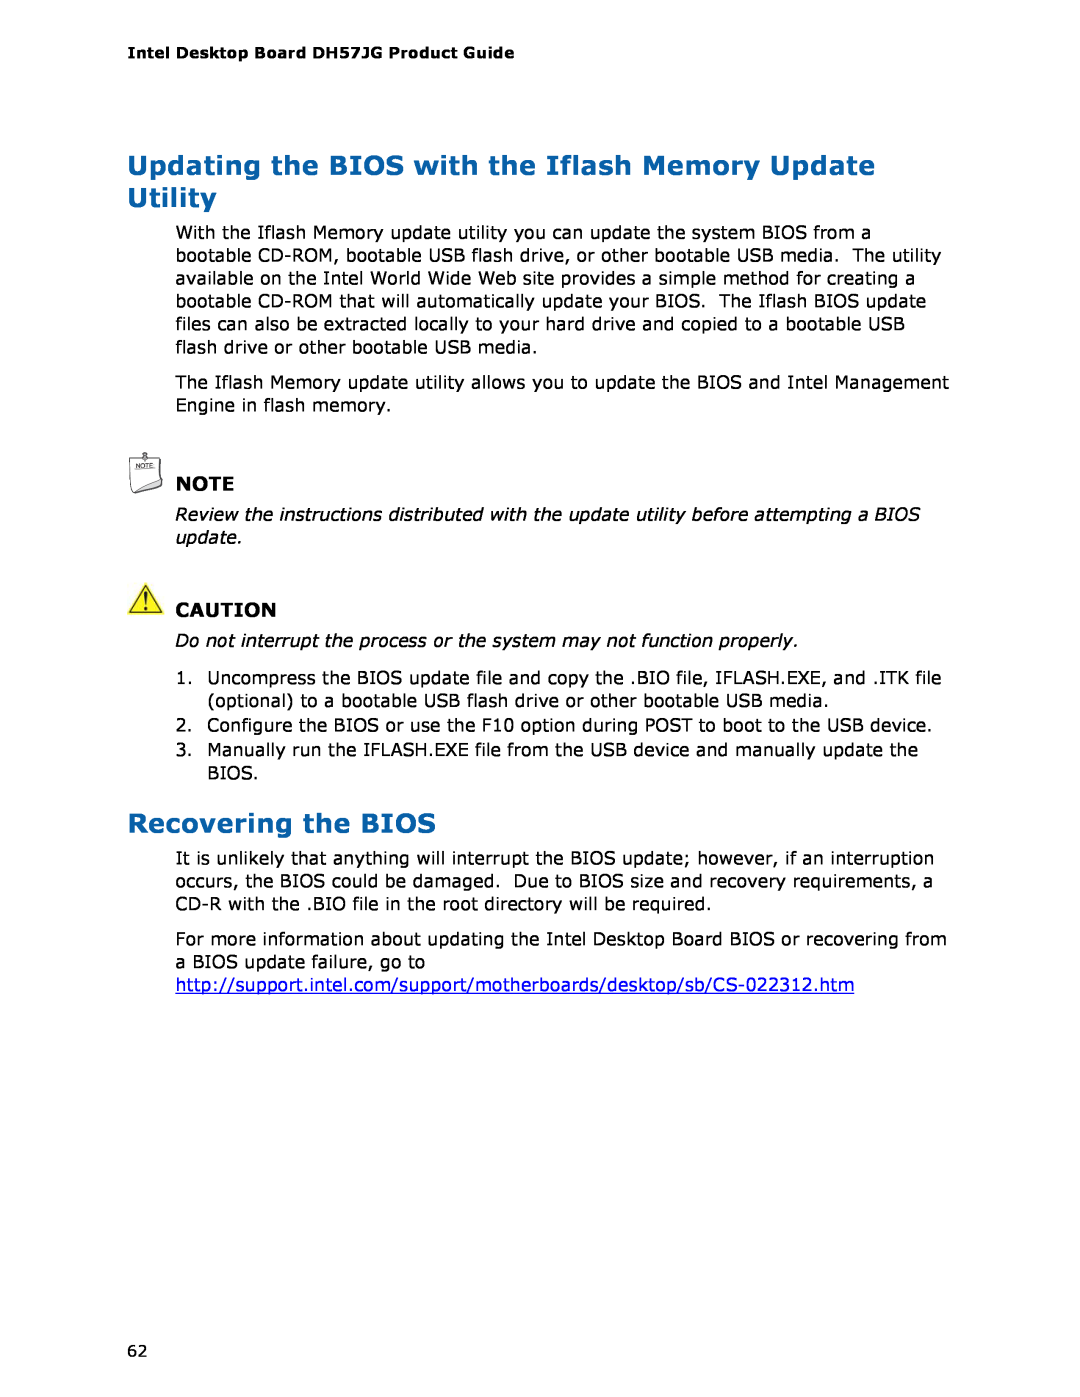 Intel BLKDH57JG manual Updating the BIOS with the Iflash Memory Update Utility, Recovering the BIOS 